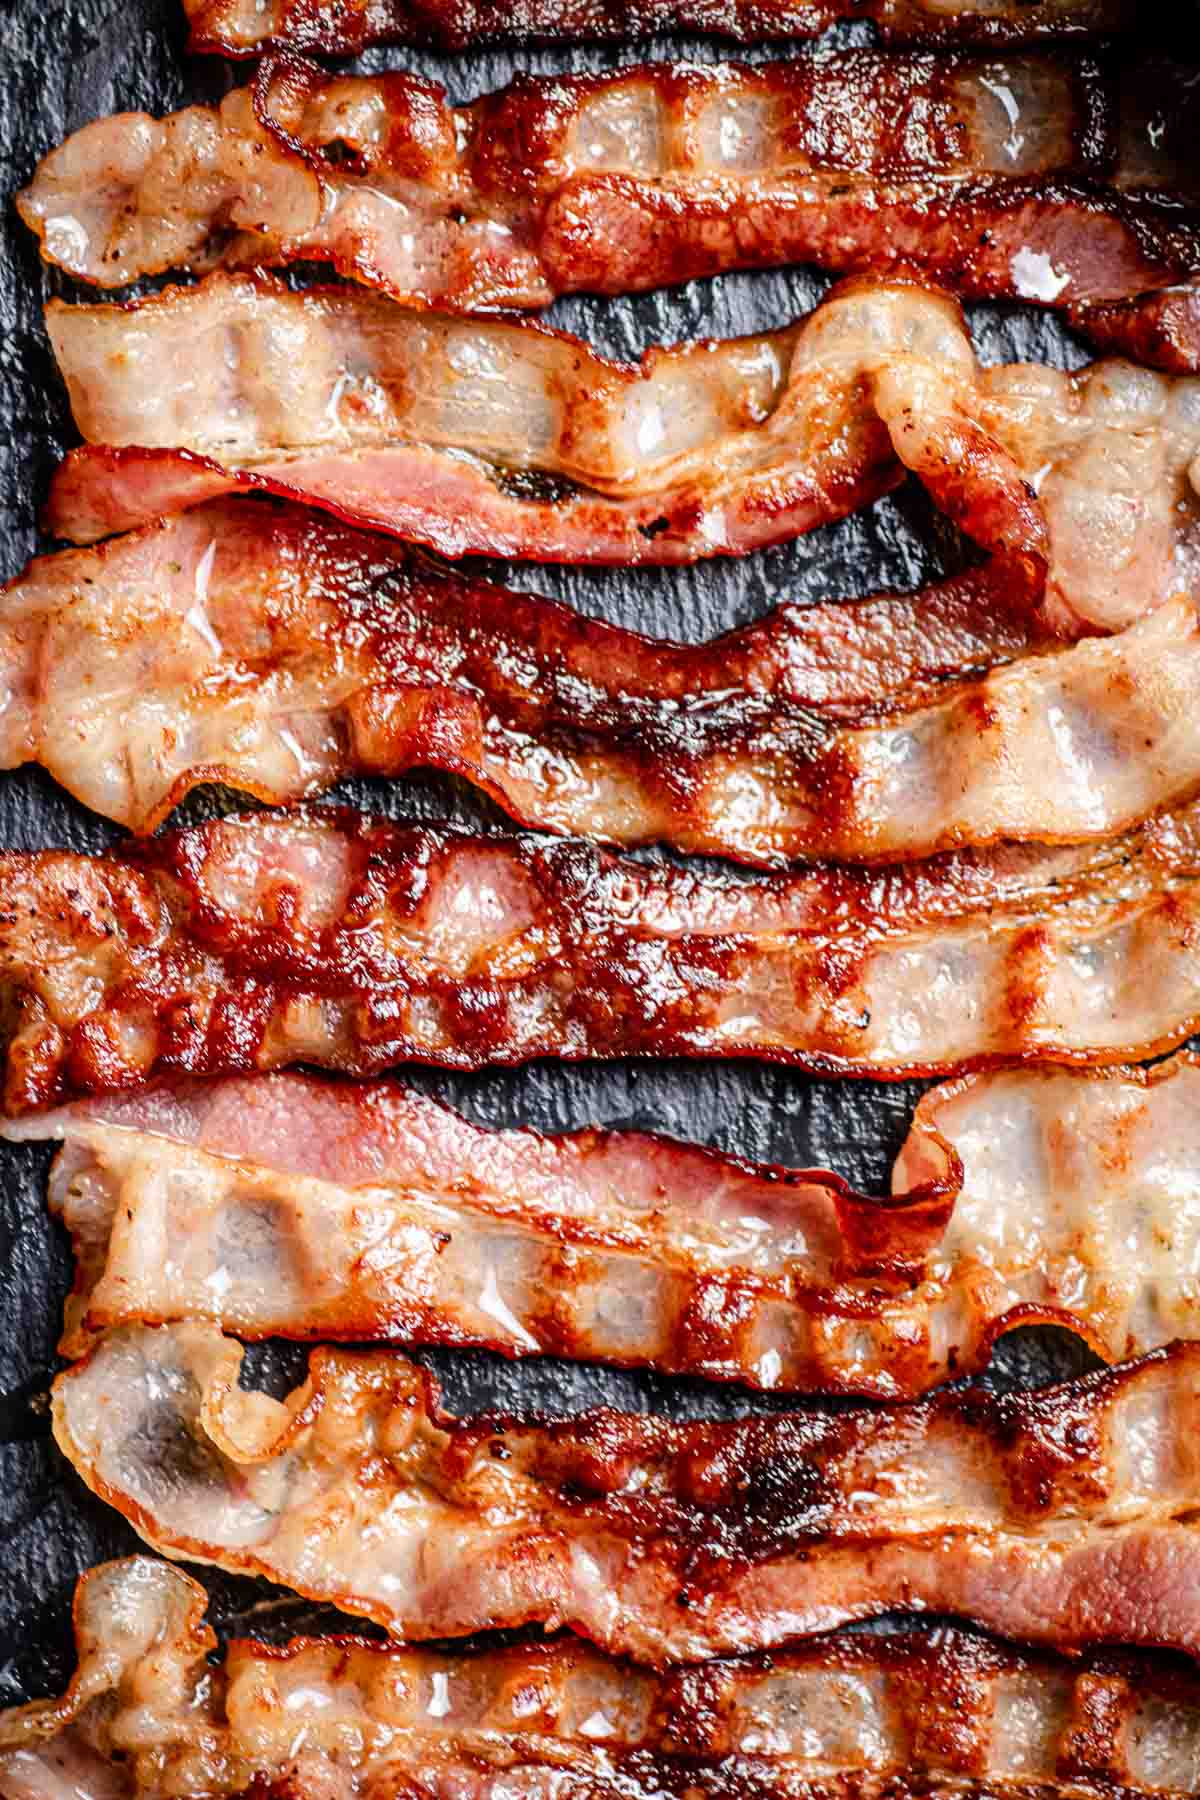 Strips of crispy bacon cooking in an oven.